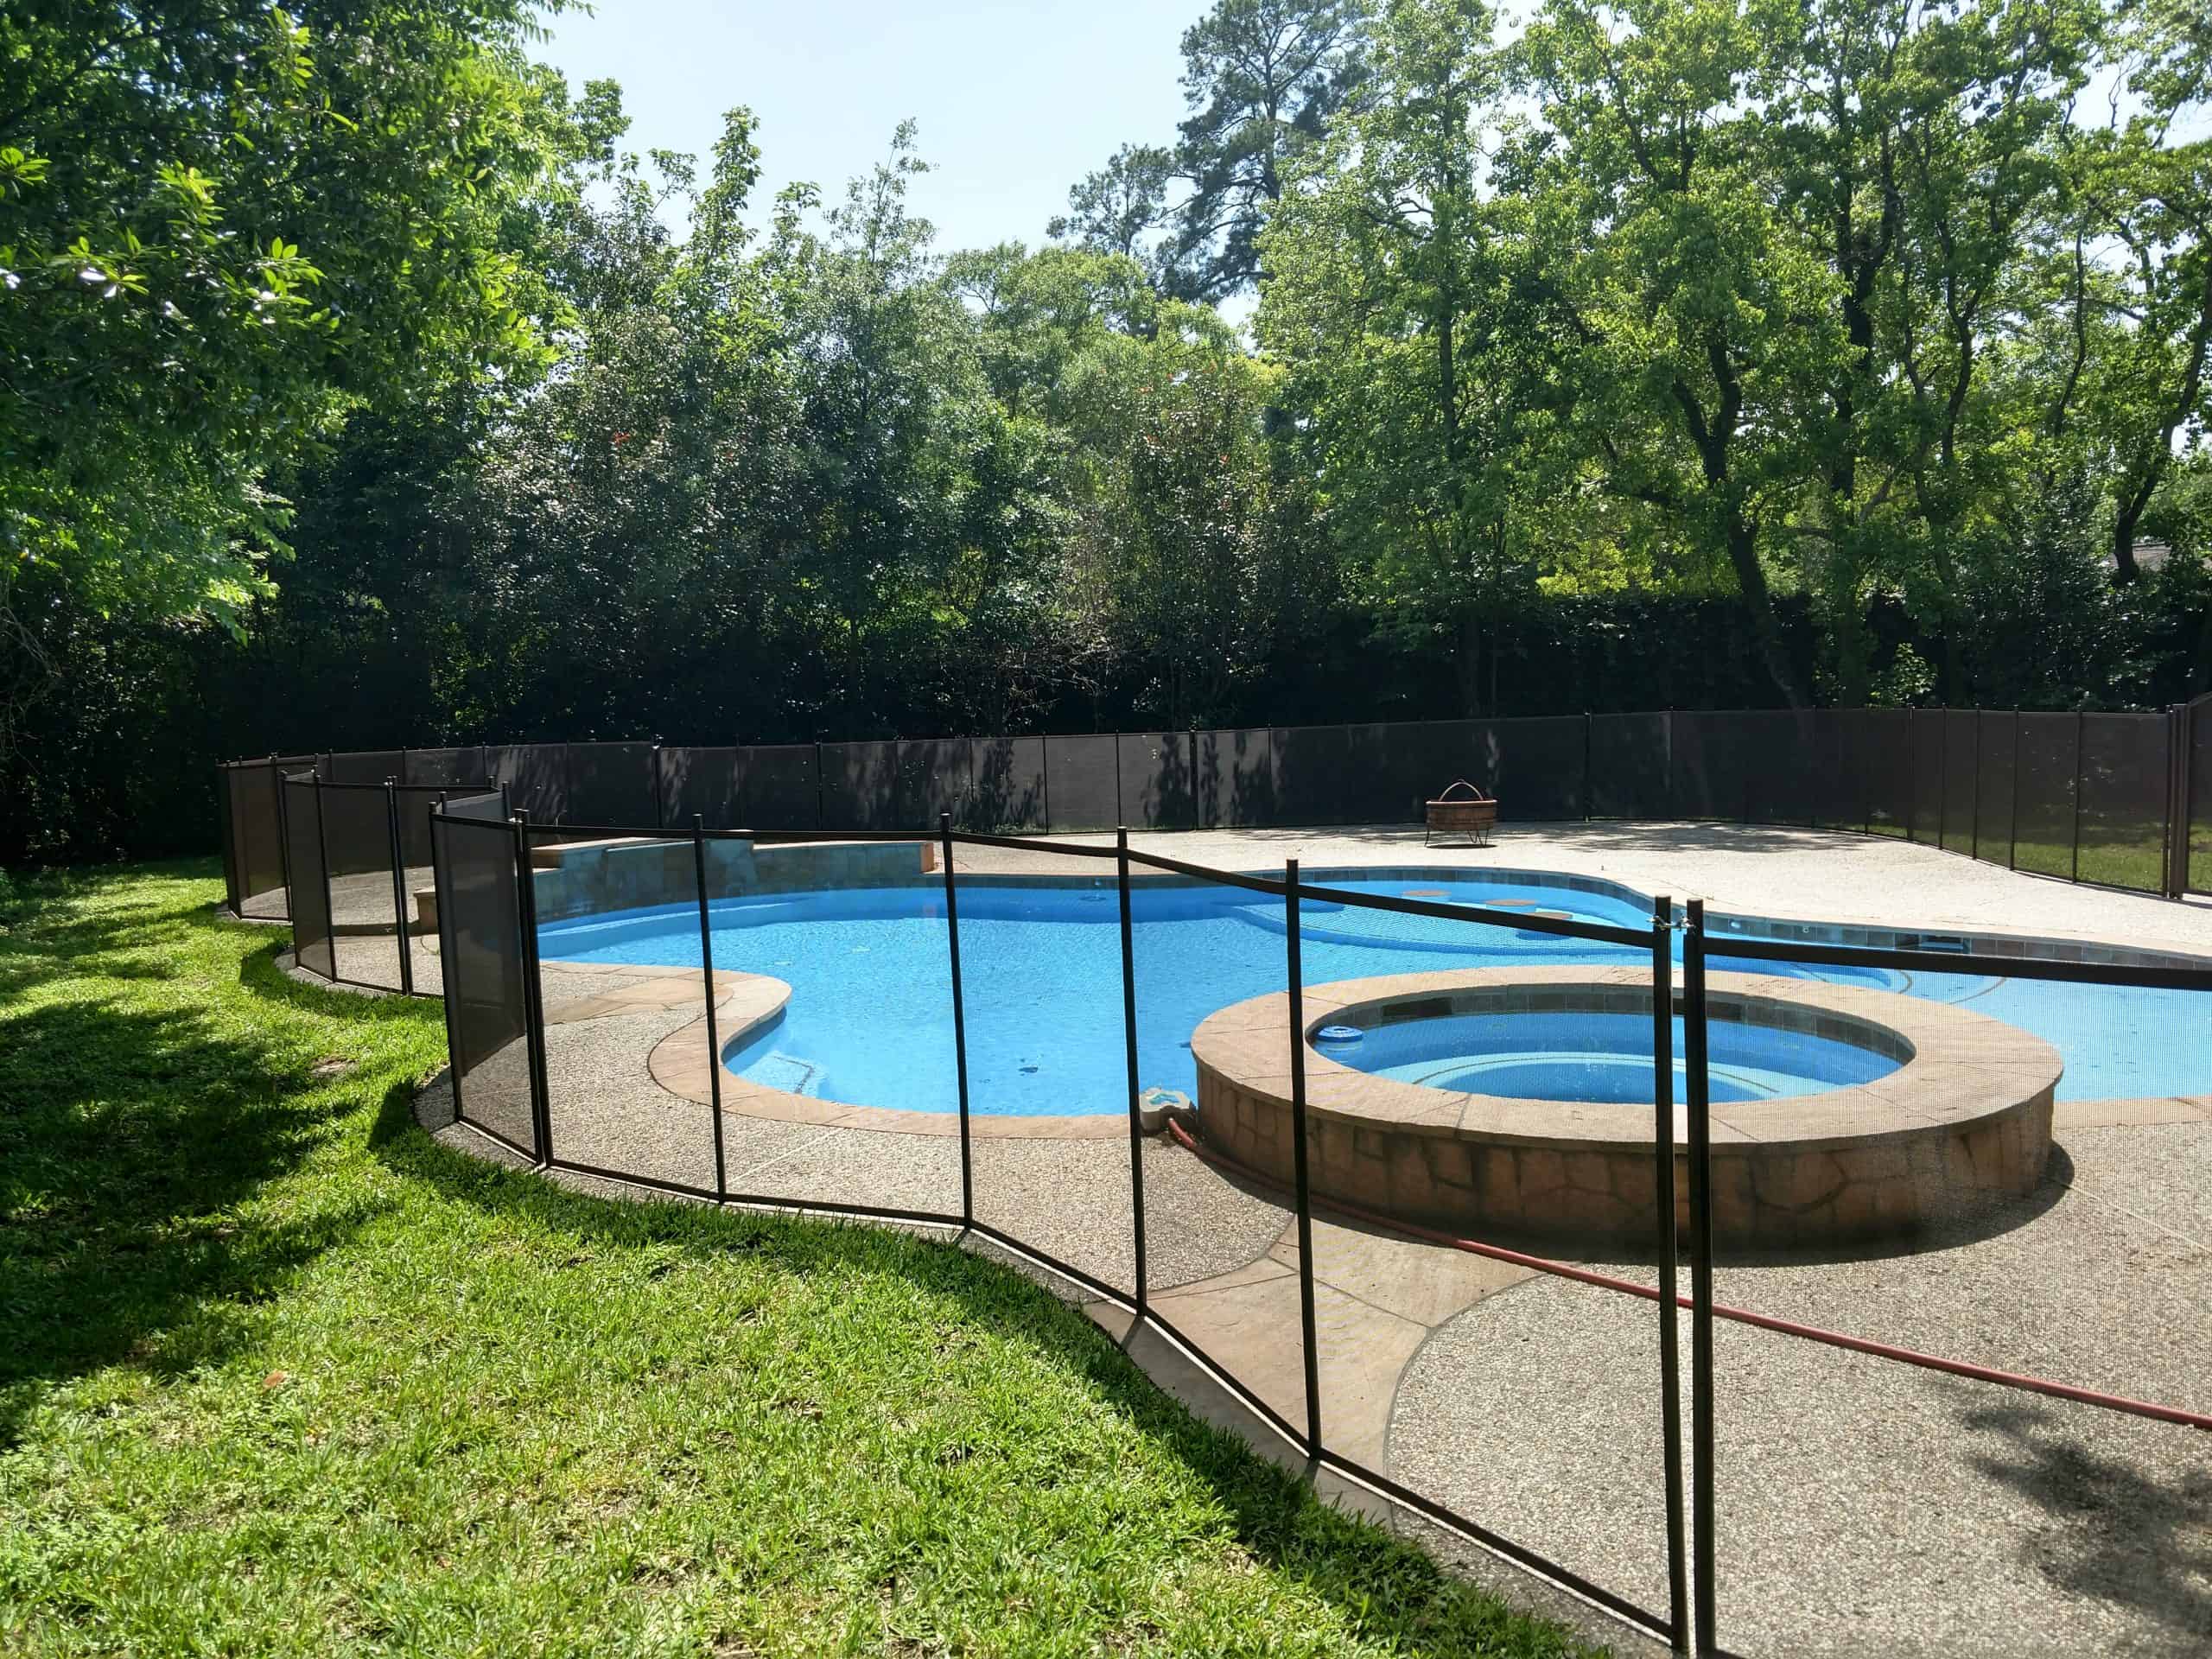 A Mesh Pool Fence Is the Way to Go